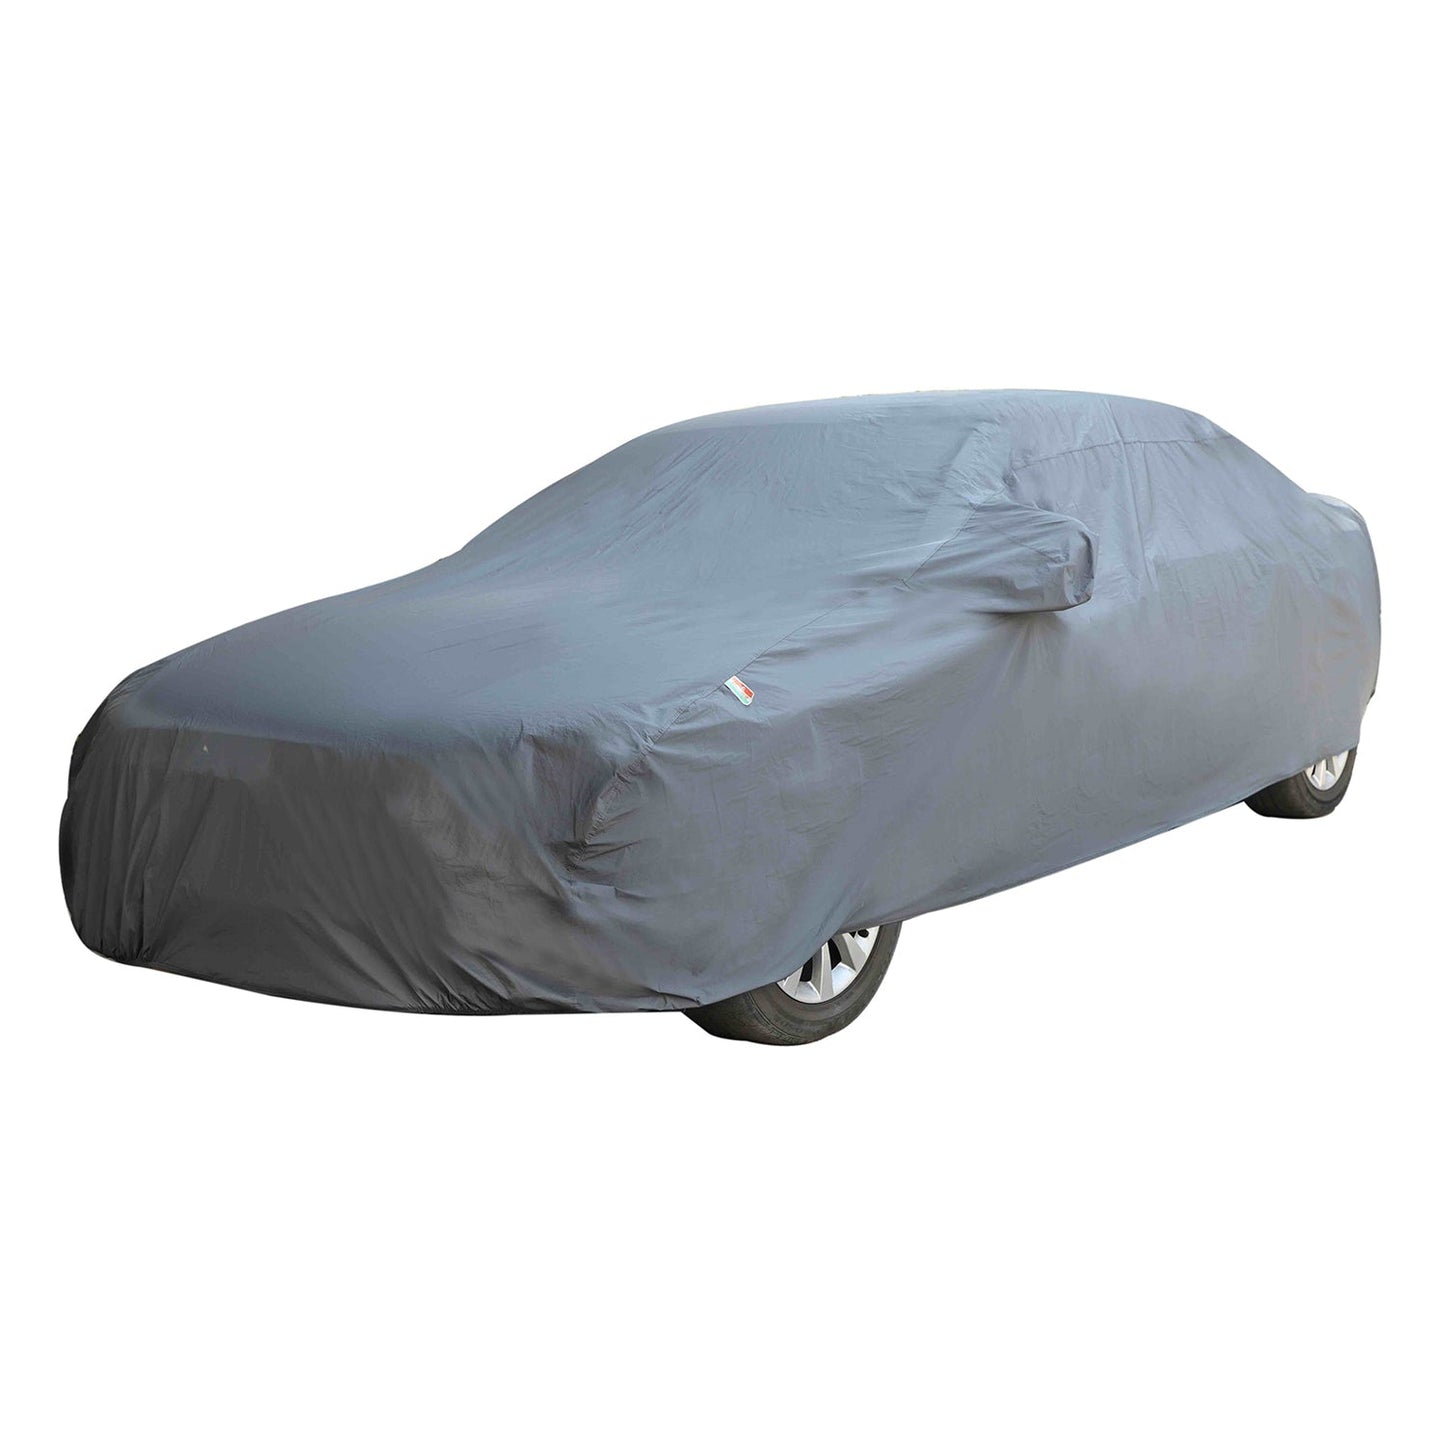 Oshotto Dark Grey 100% Anti Reflective, dustproof and Water Proof Car Body Cover with Mirror Pockets For KIA Carens